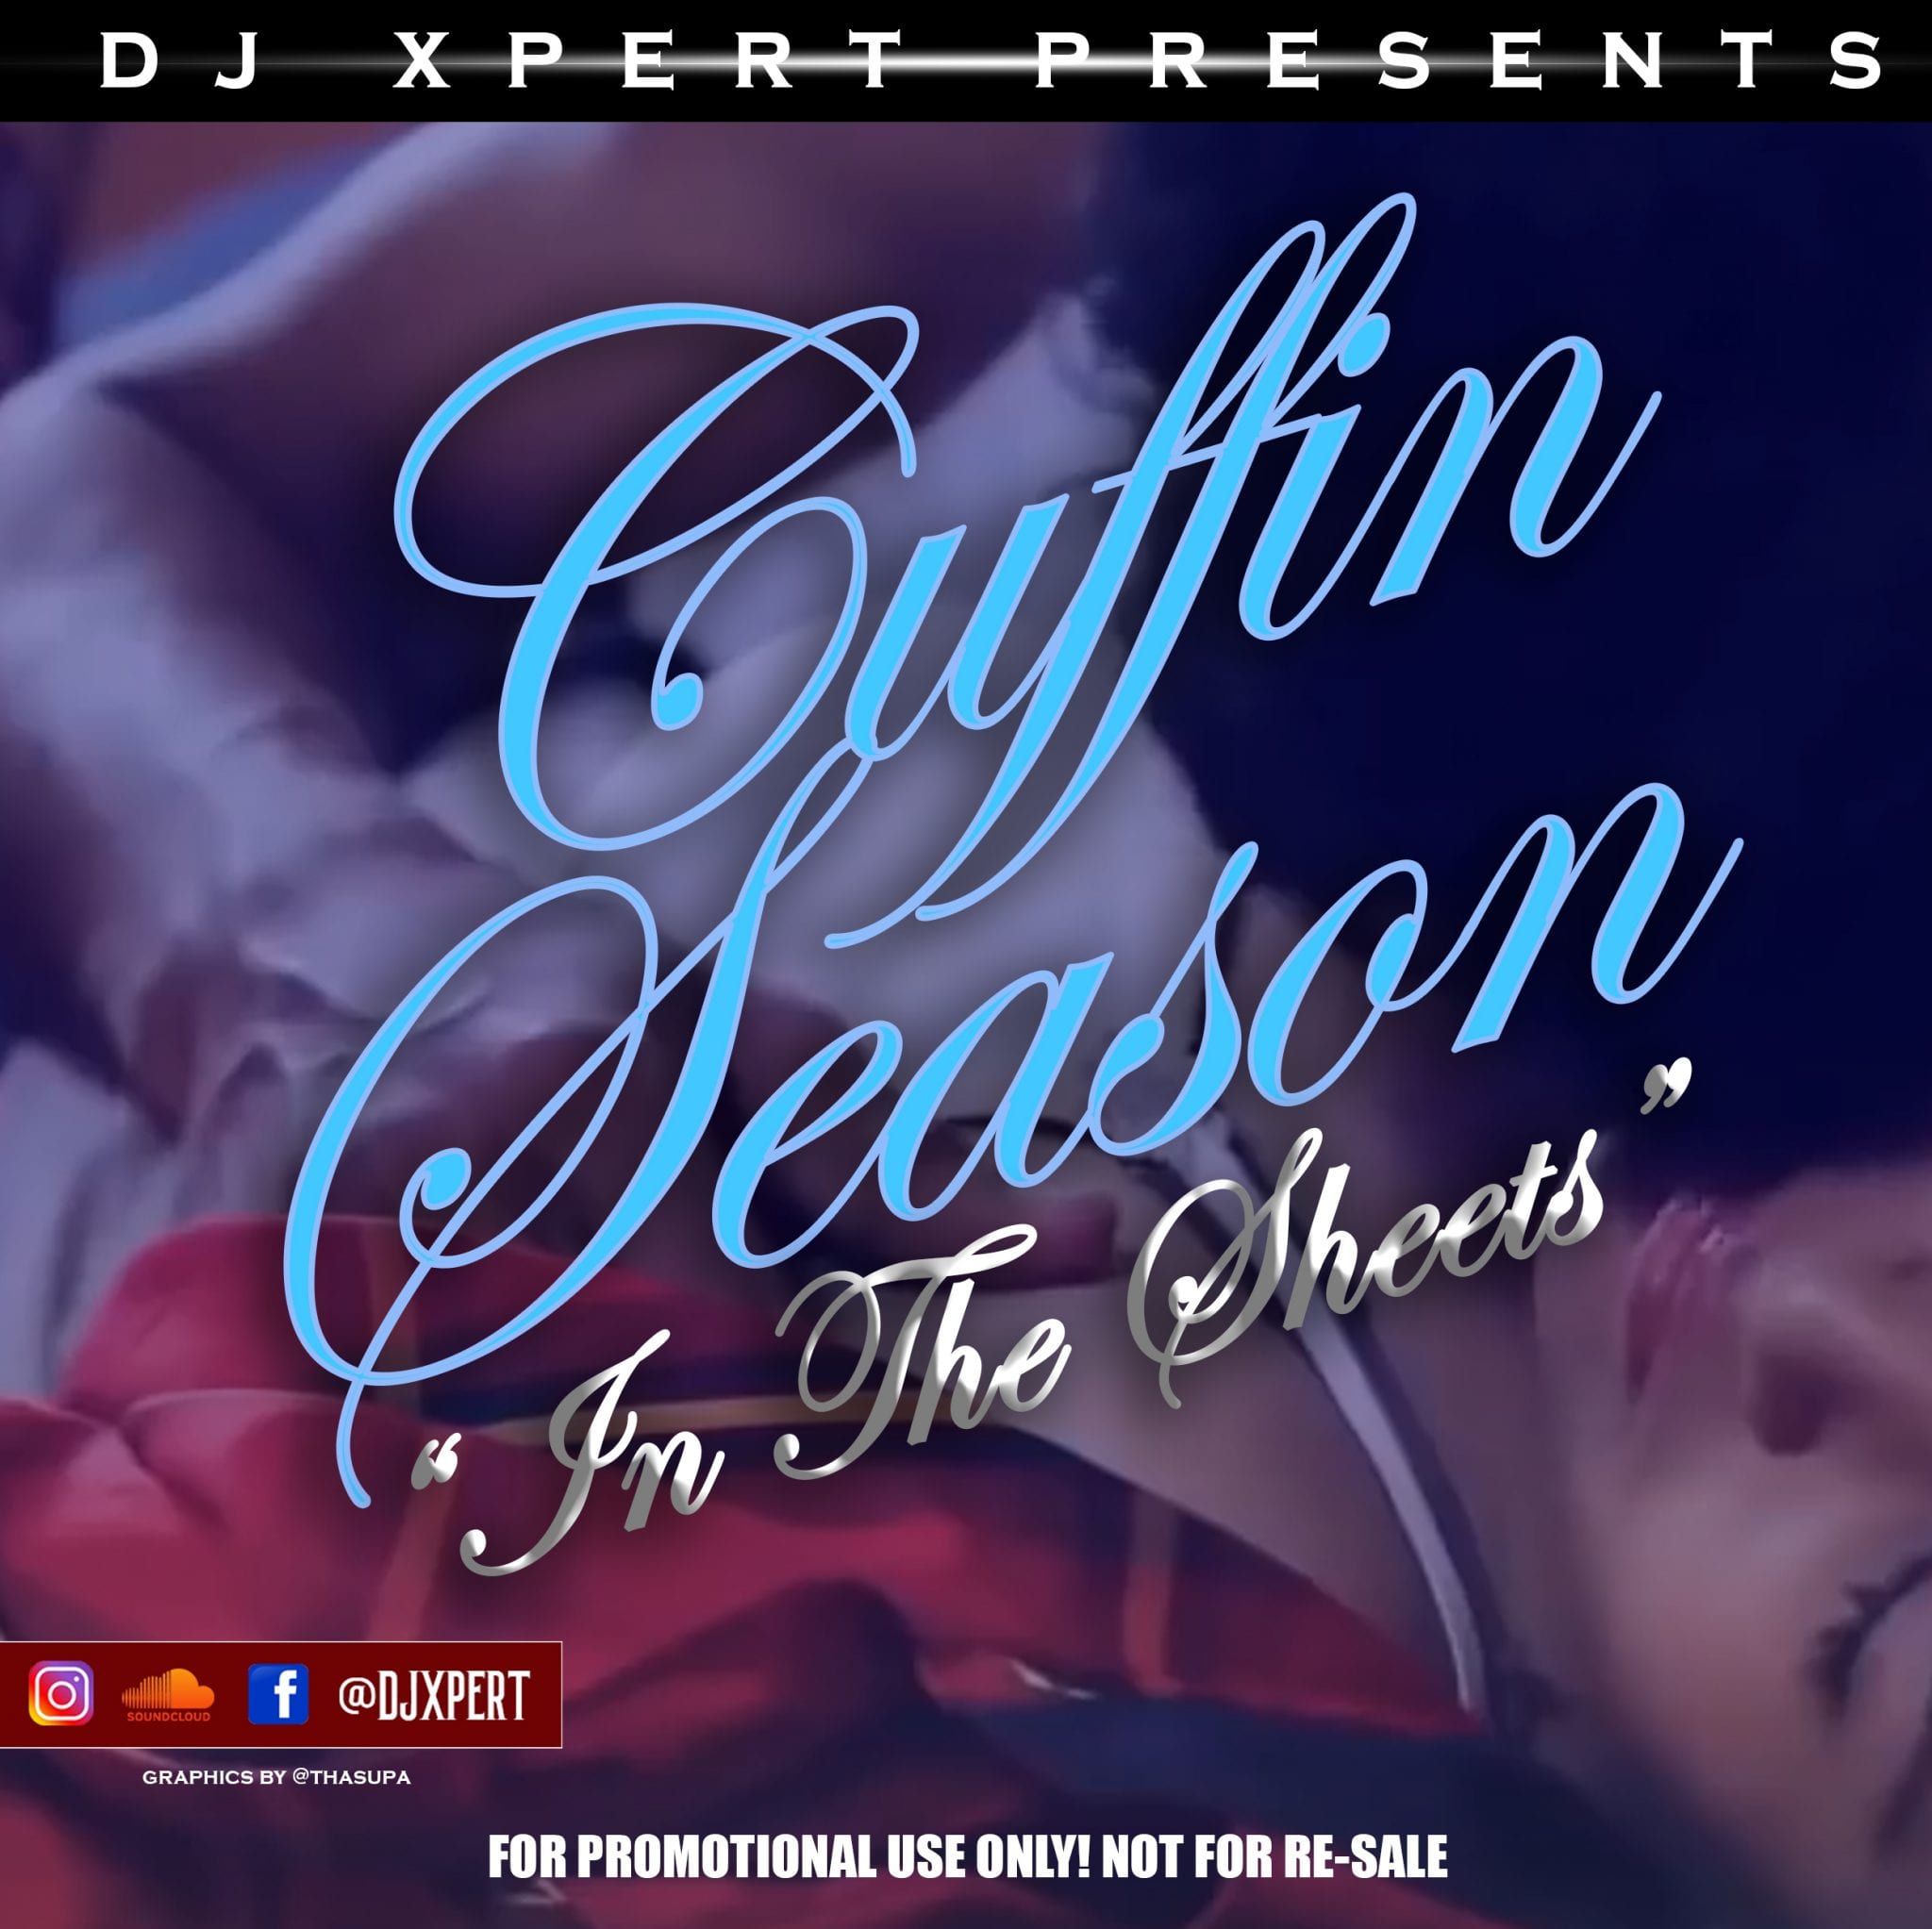 Dj Xpert Presents Cuffin Season pt 2. In the Sheets